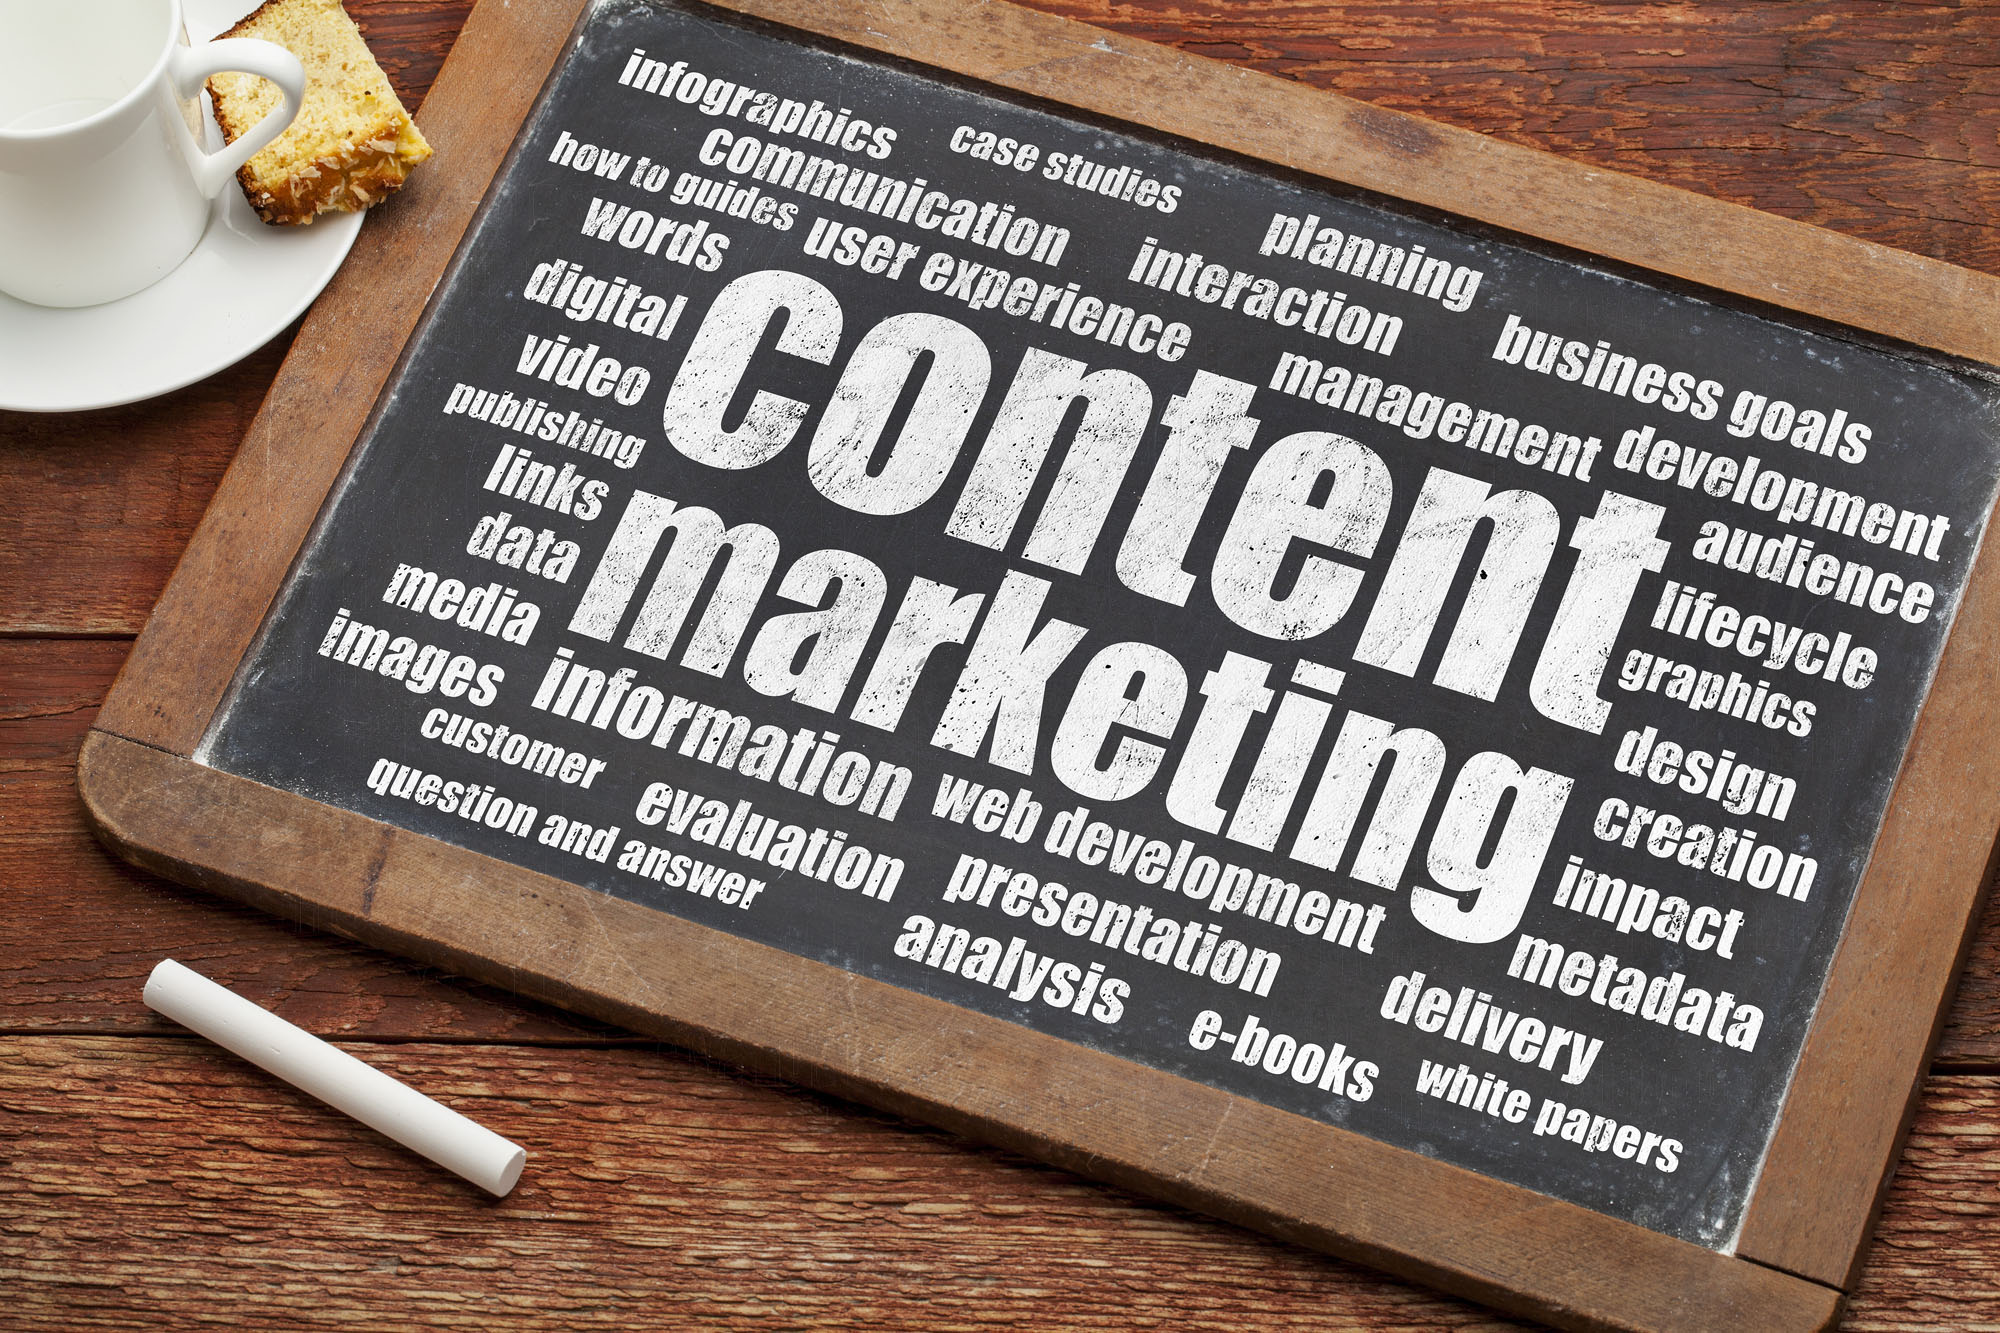 Content Marketing : how to write a compatible topic with search engines ?